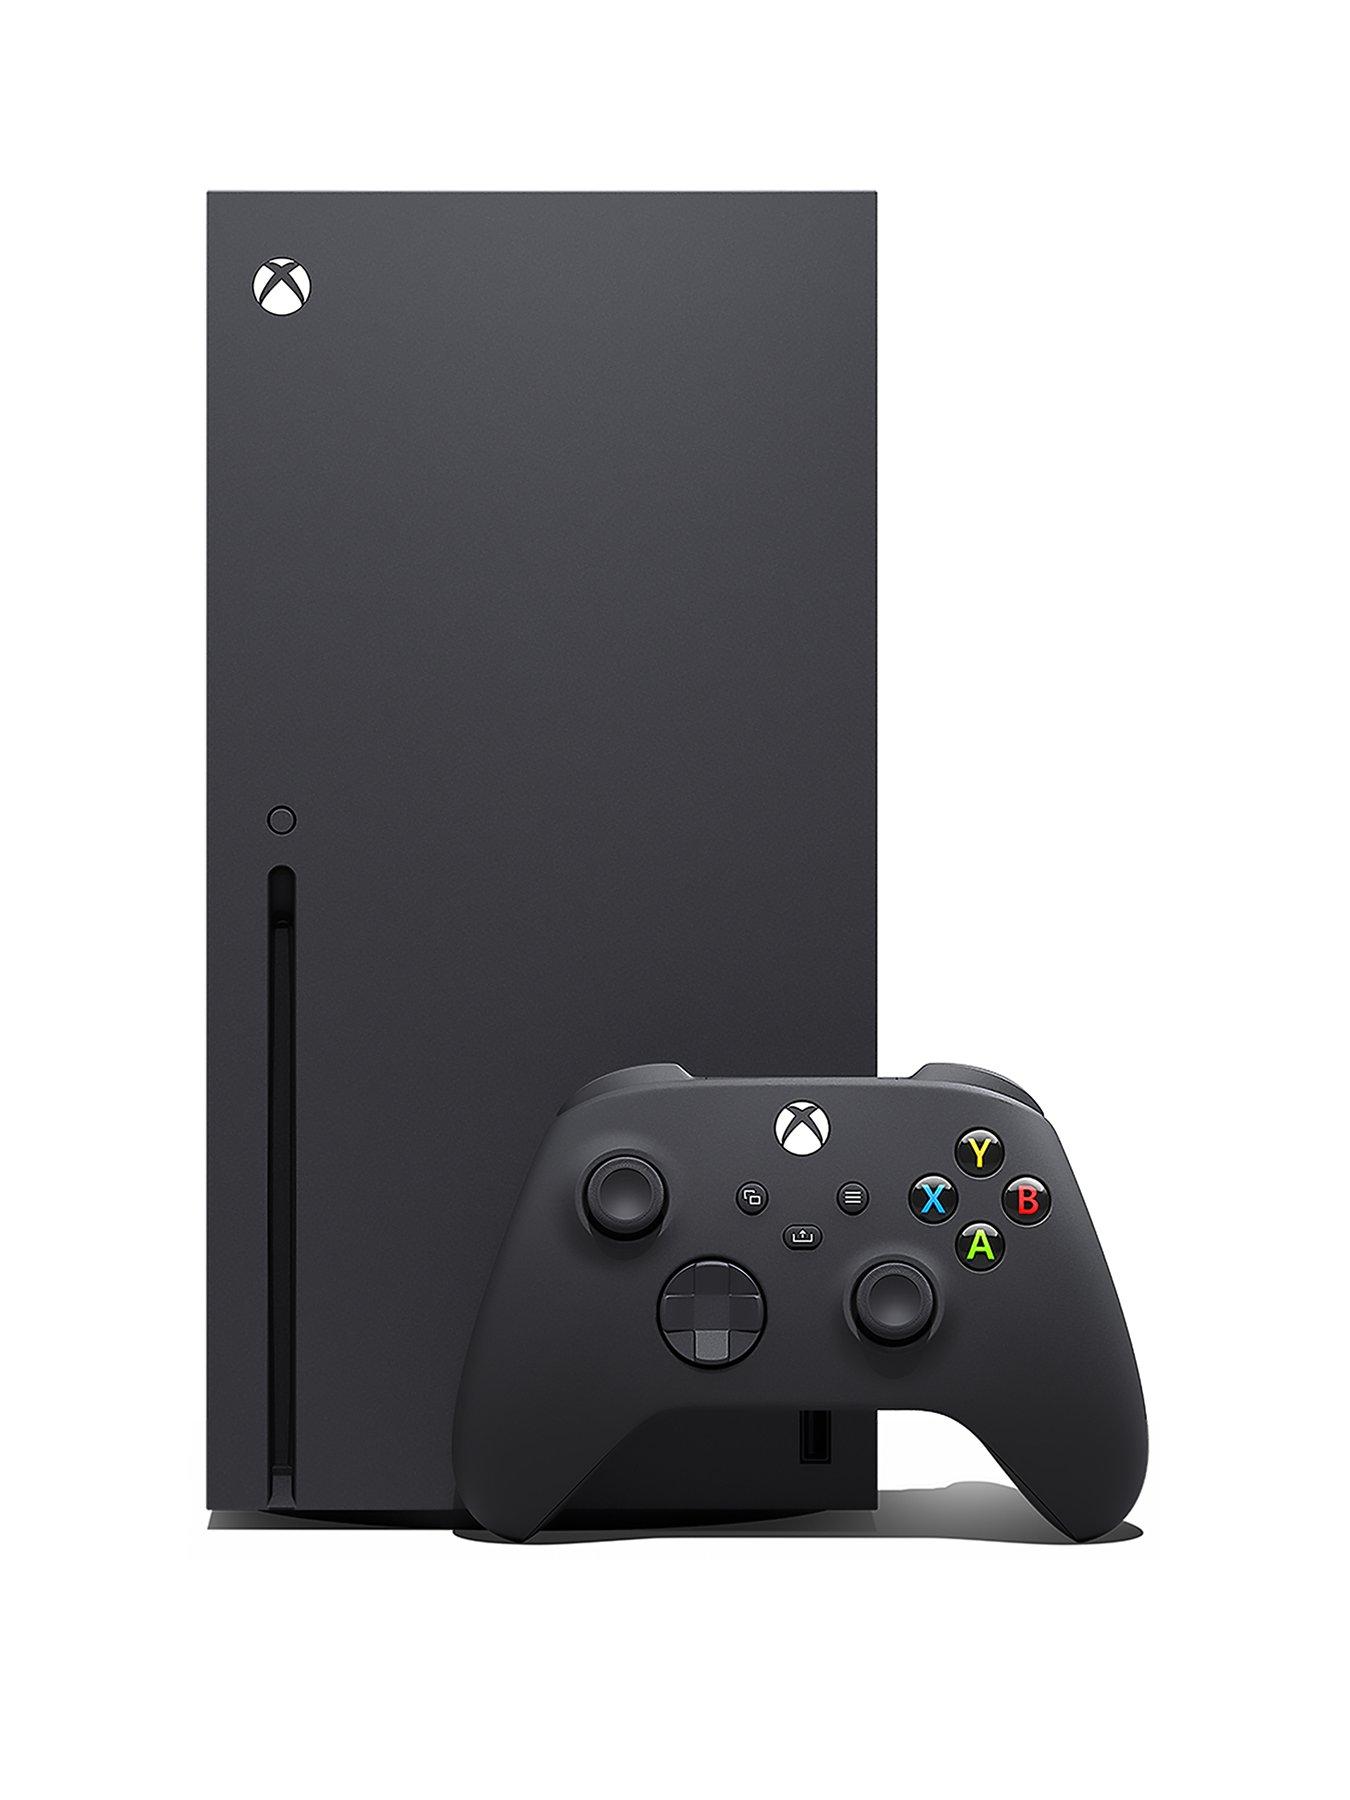 Xbox One X comes hand in hand with massive downloads